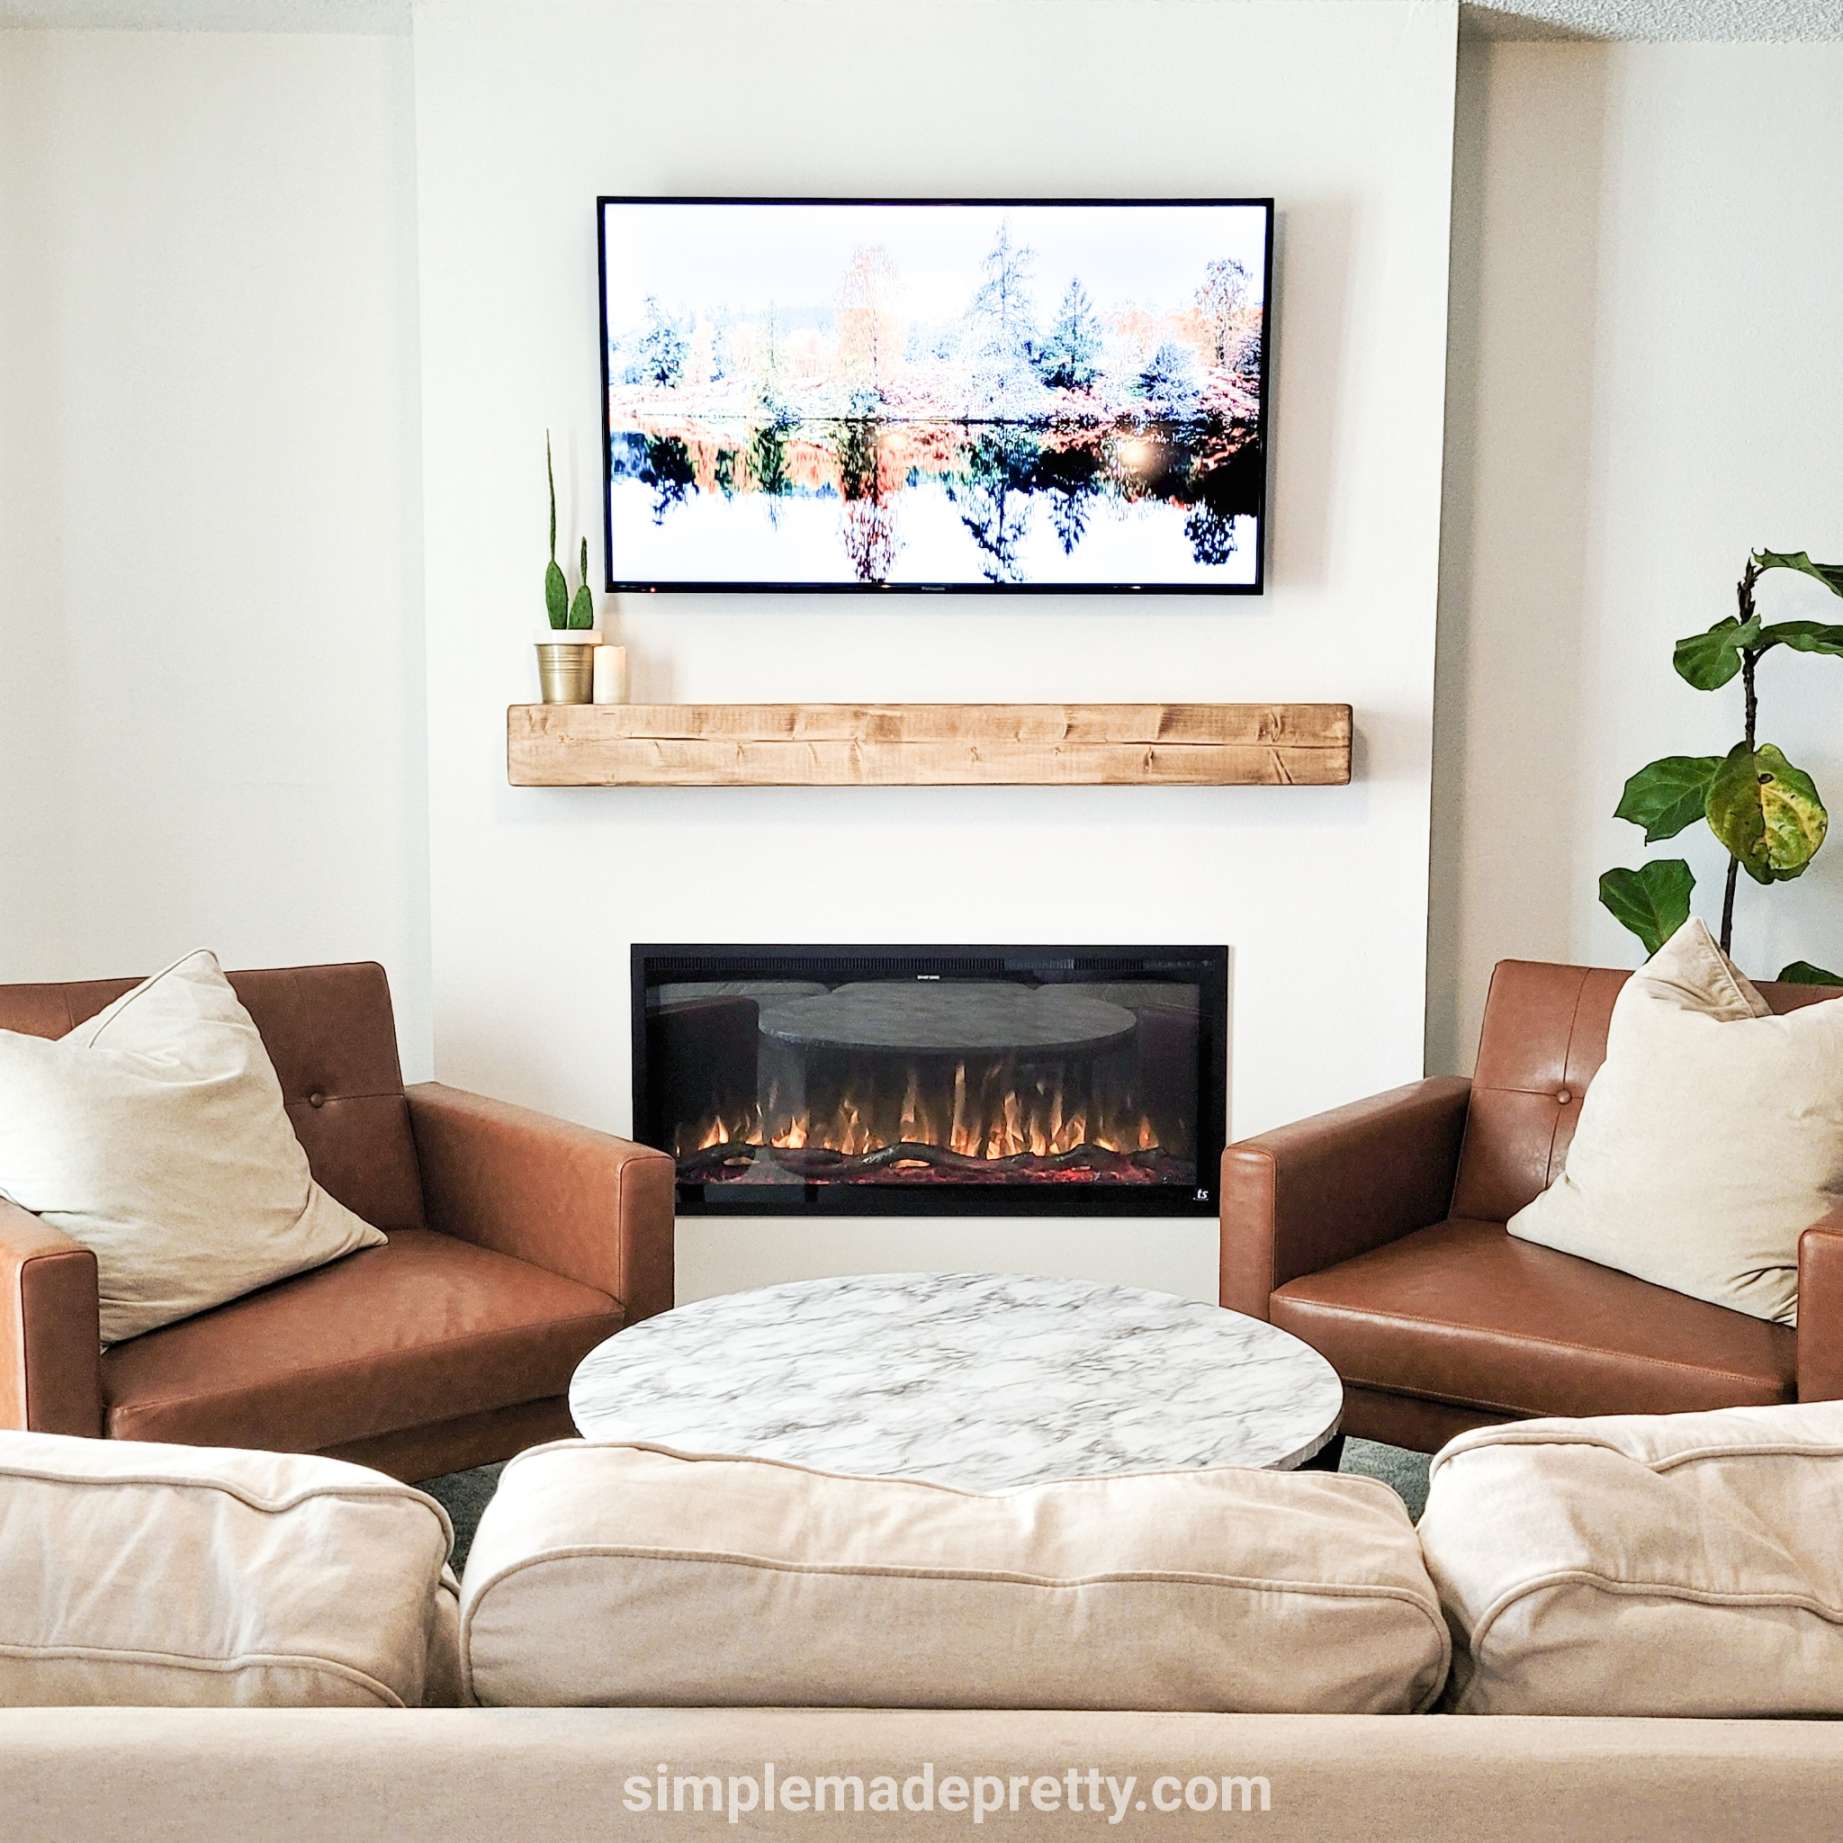 DIY Fireplace Build Out - Simple Made Pretty ()